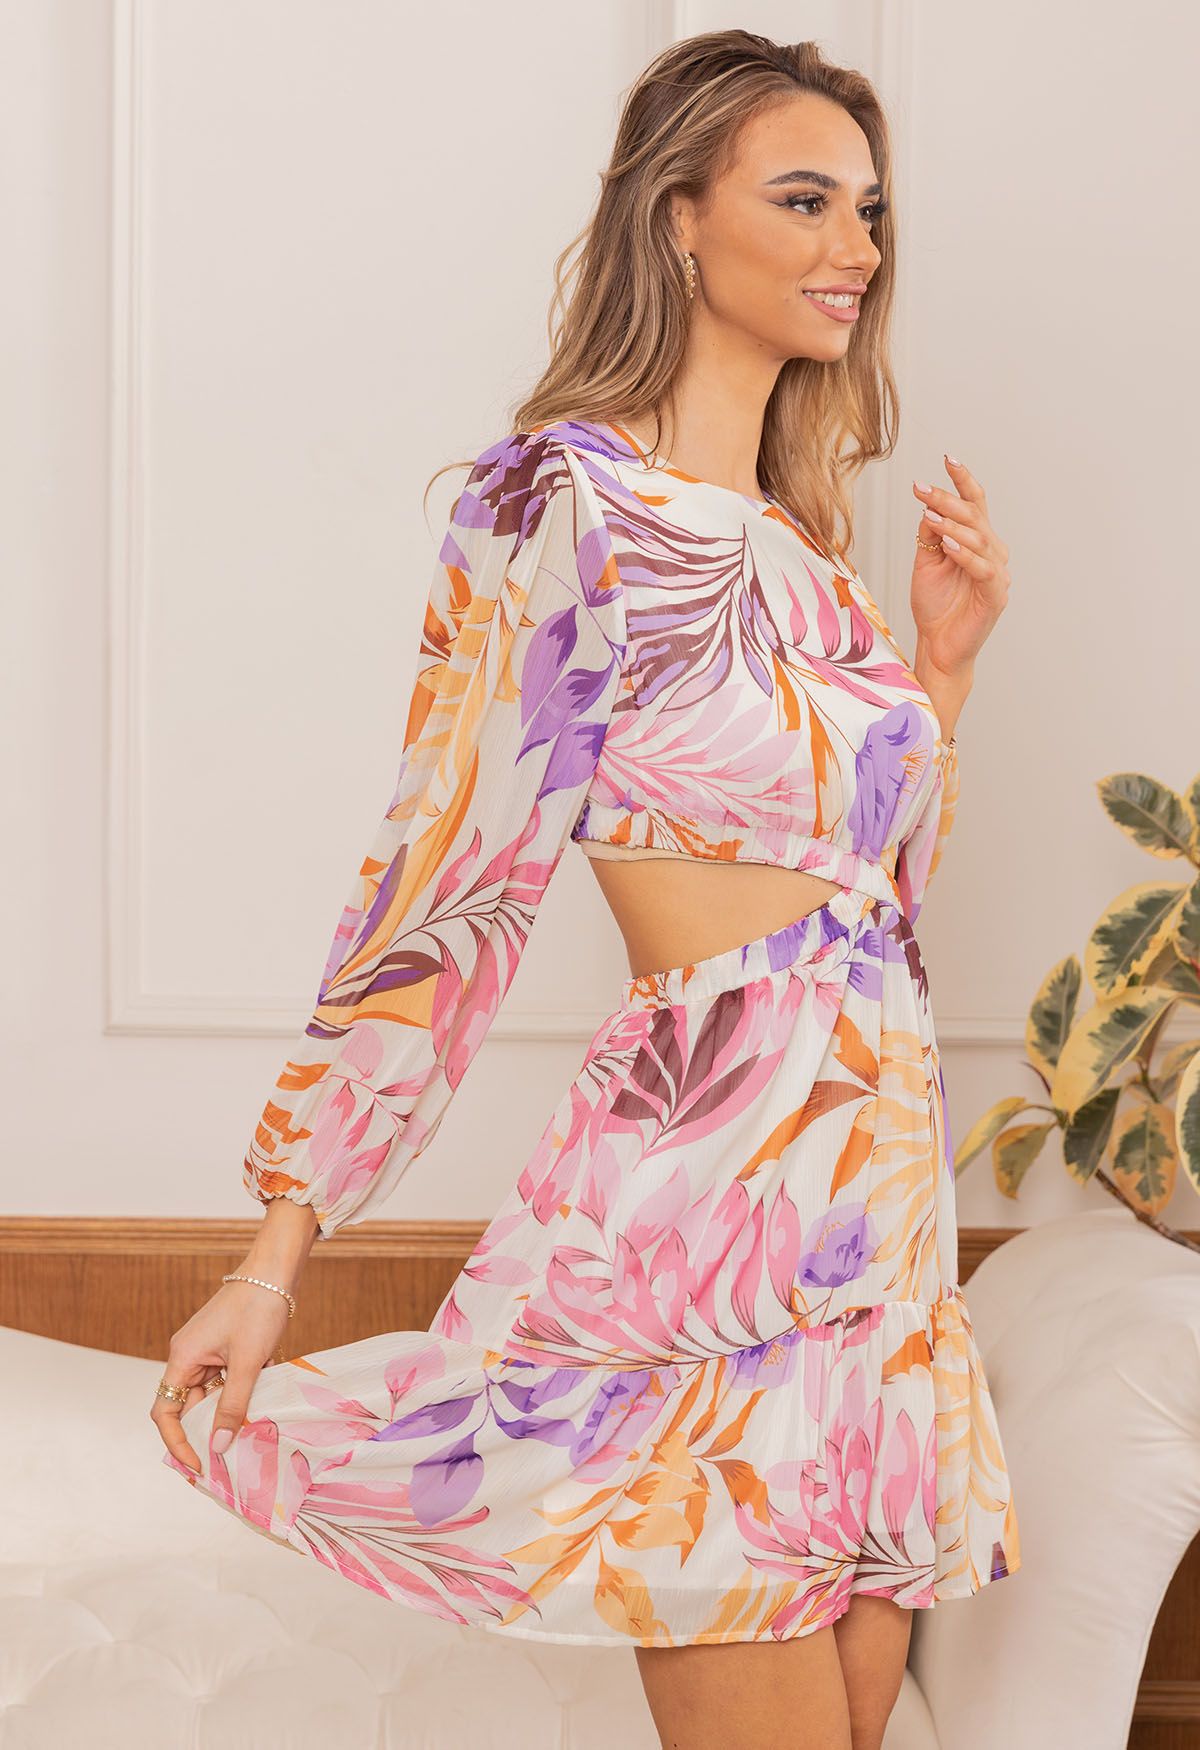 Tropical Vibe – Chiffon-Minikleid mit Cut-Outs in der Taille